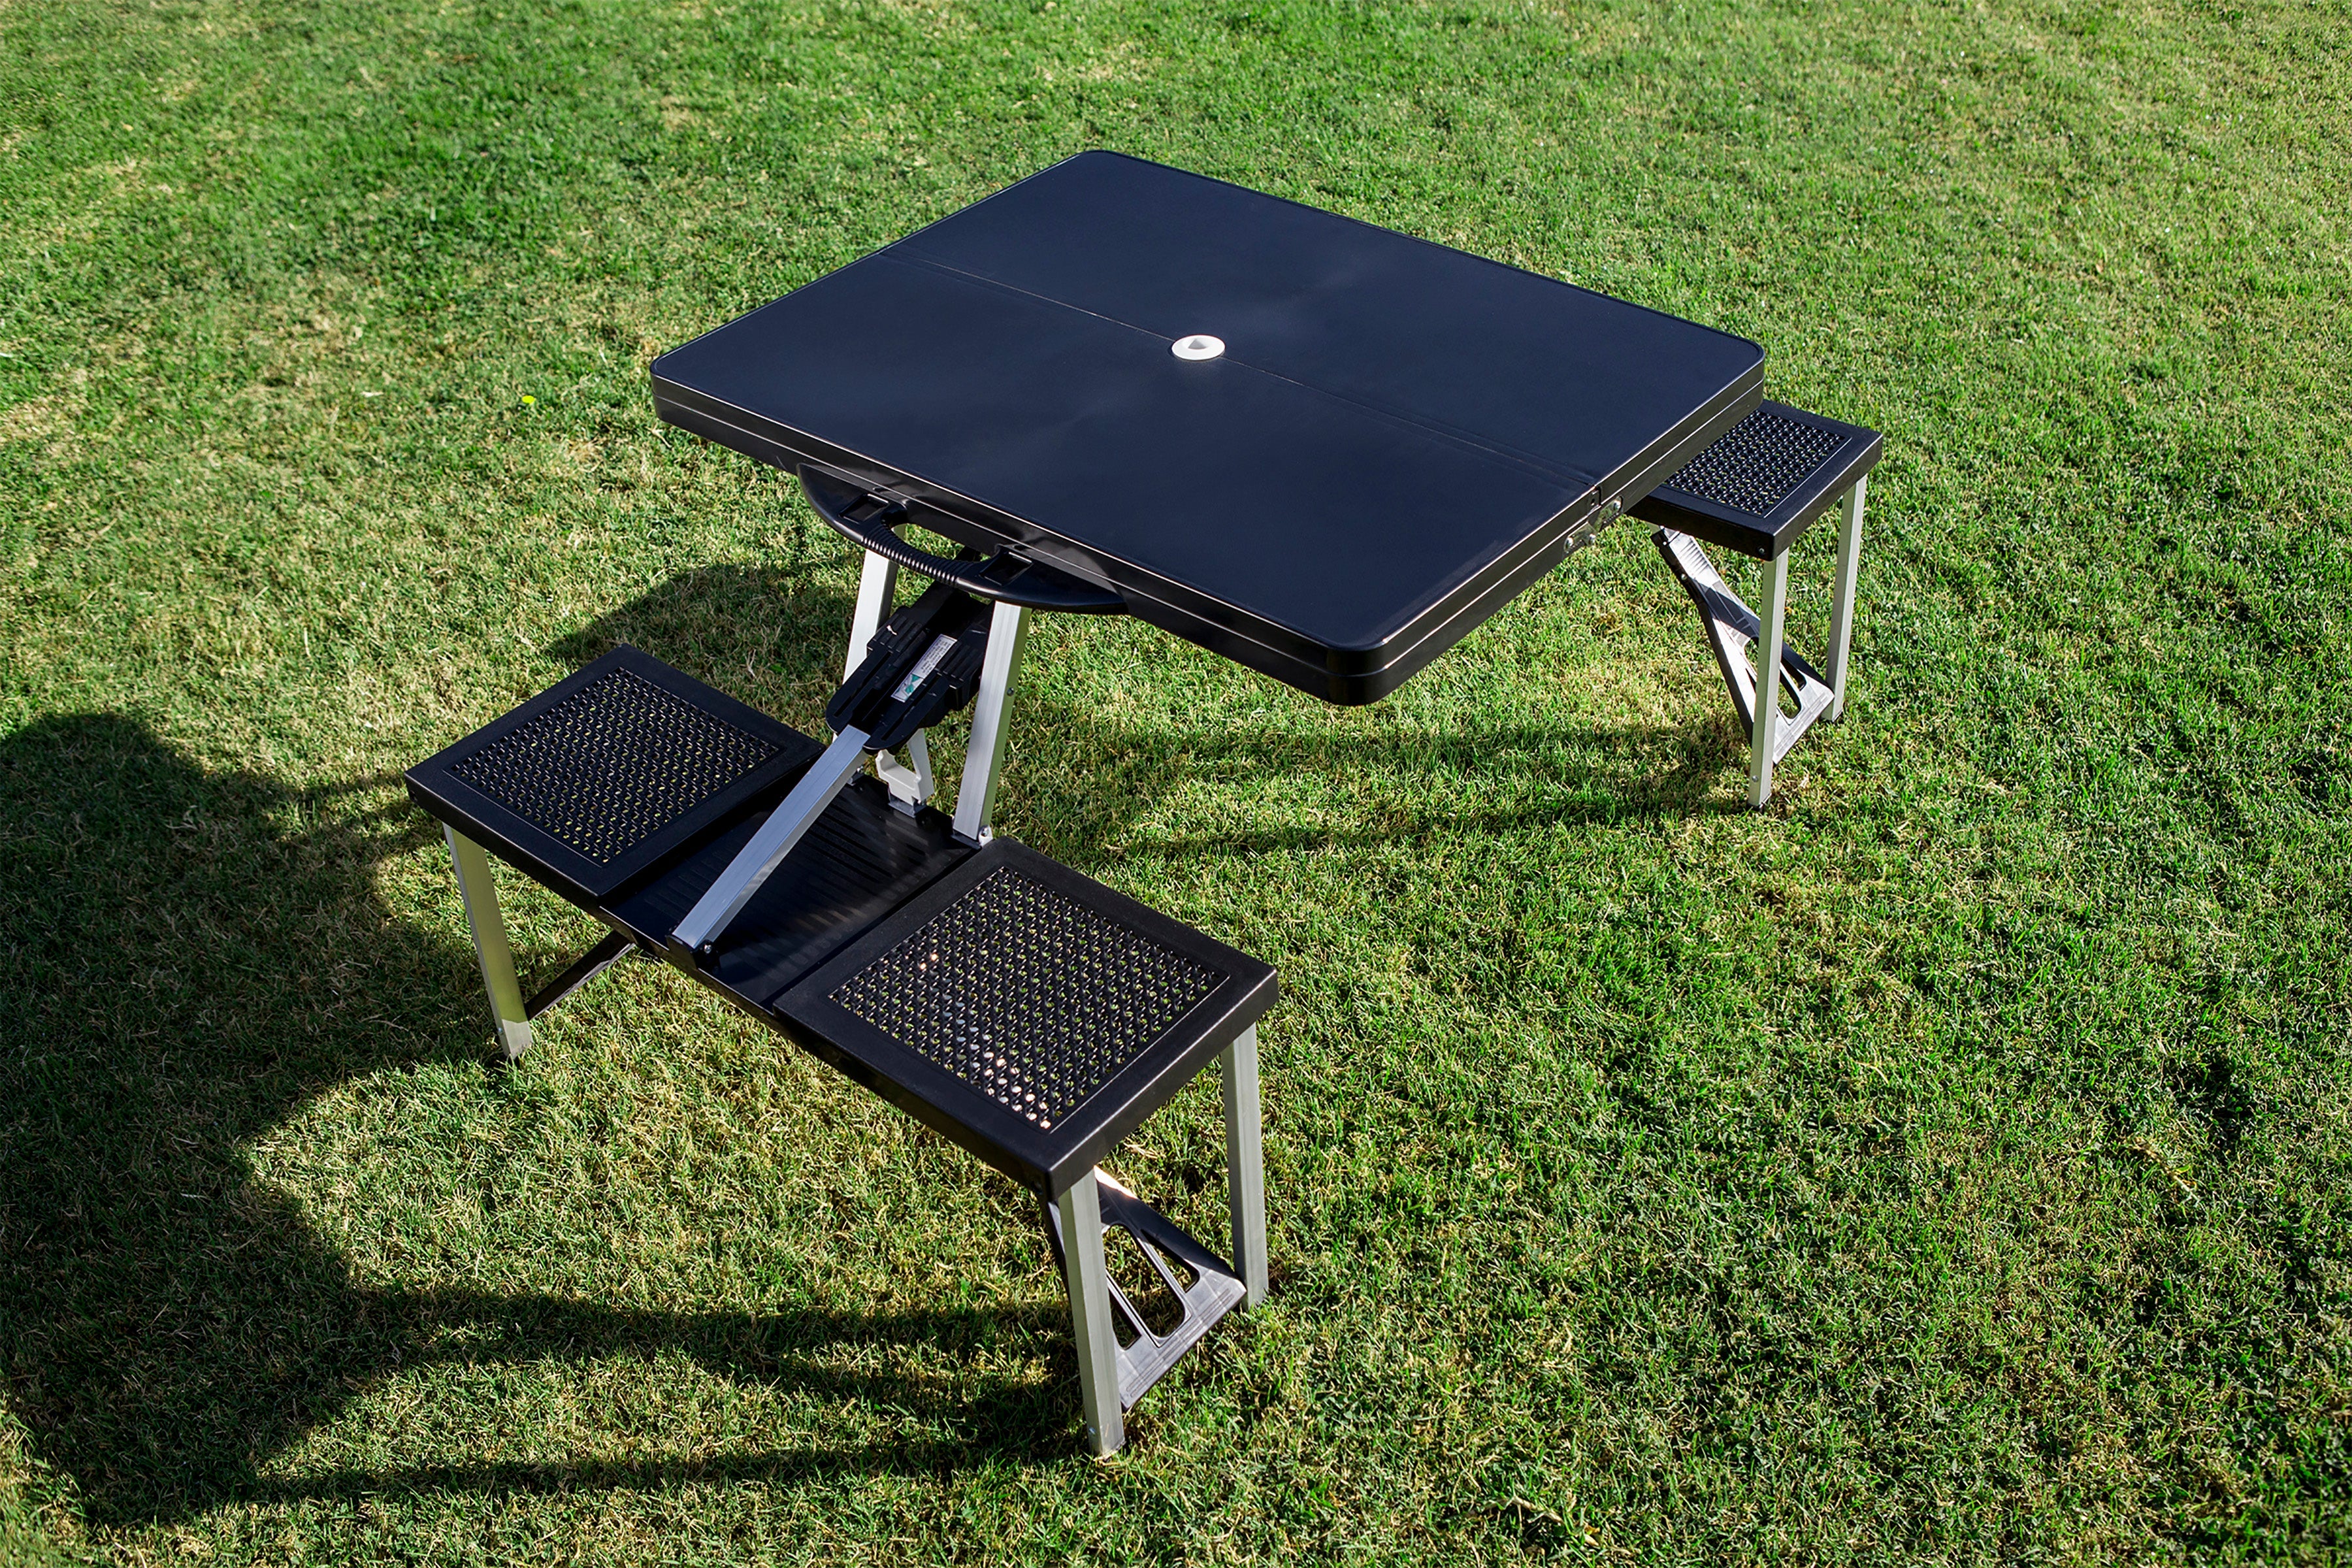 Football Field - Auburn Tigers - Picnic Table Portable Folding Table with Seats